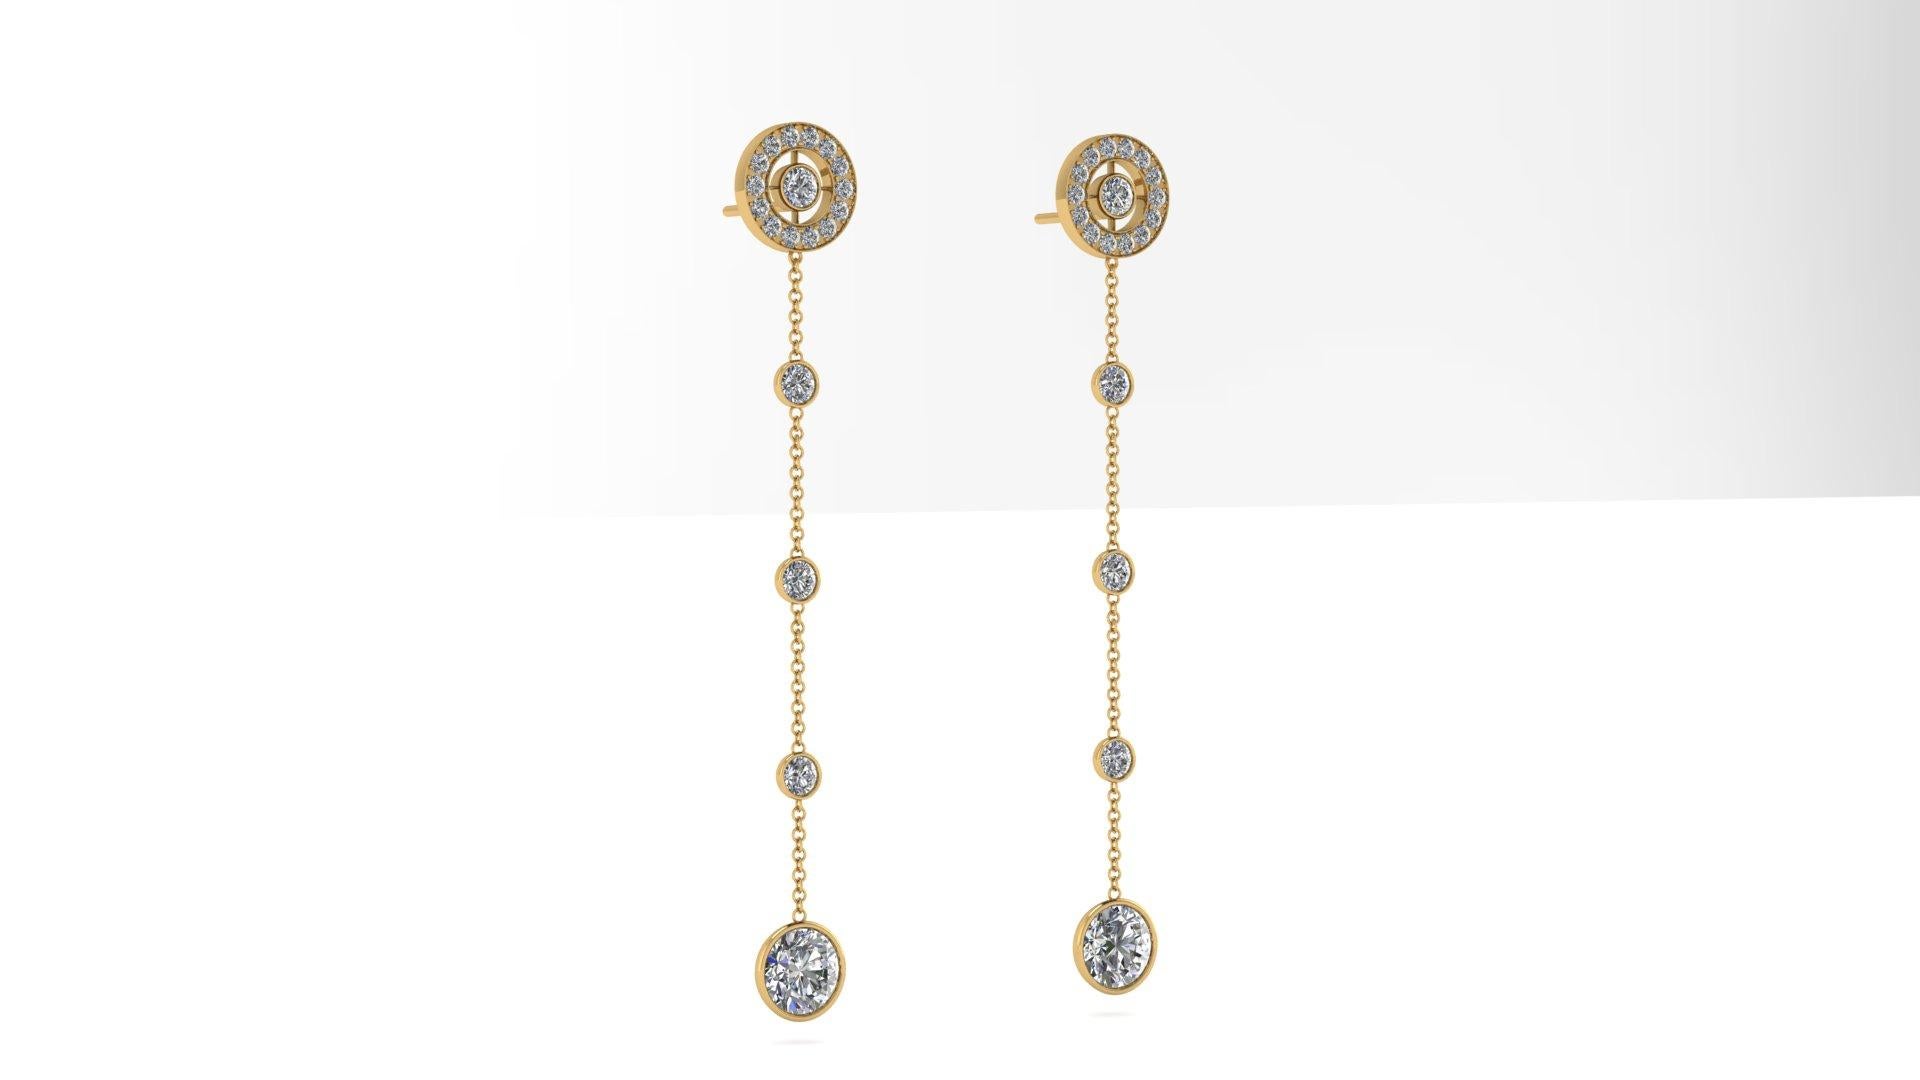 3.25 carats Diamonds dangling earrings made in 18k Yellow gold.
The length of the earrings is 66 mm, the bottom two dangling roung diamonds, are 1 carat each, H color, VS1-VS2 clarity.
The middle and top diamonds' total carat weight is approximately